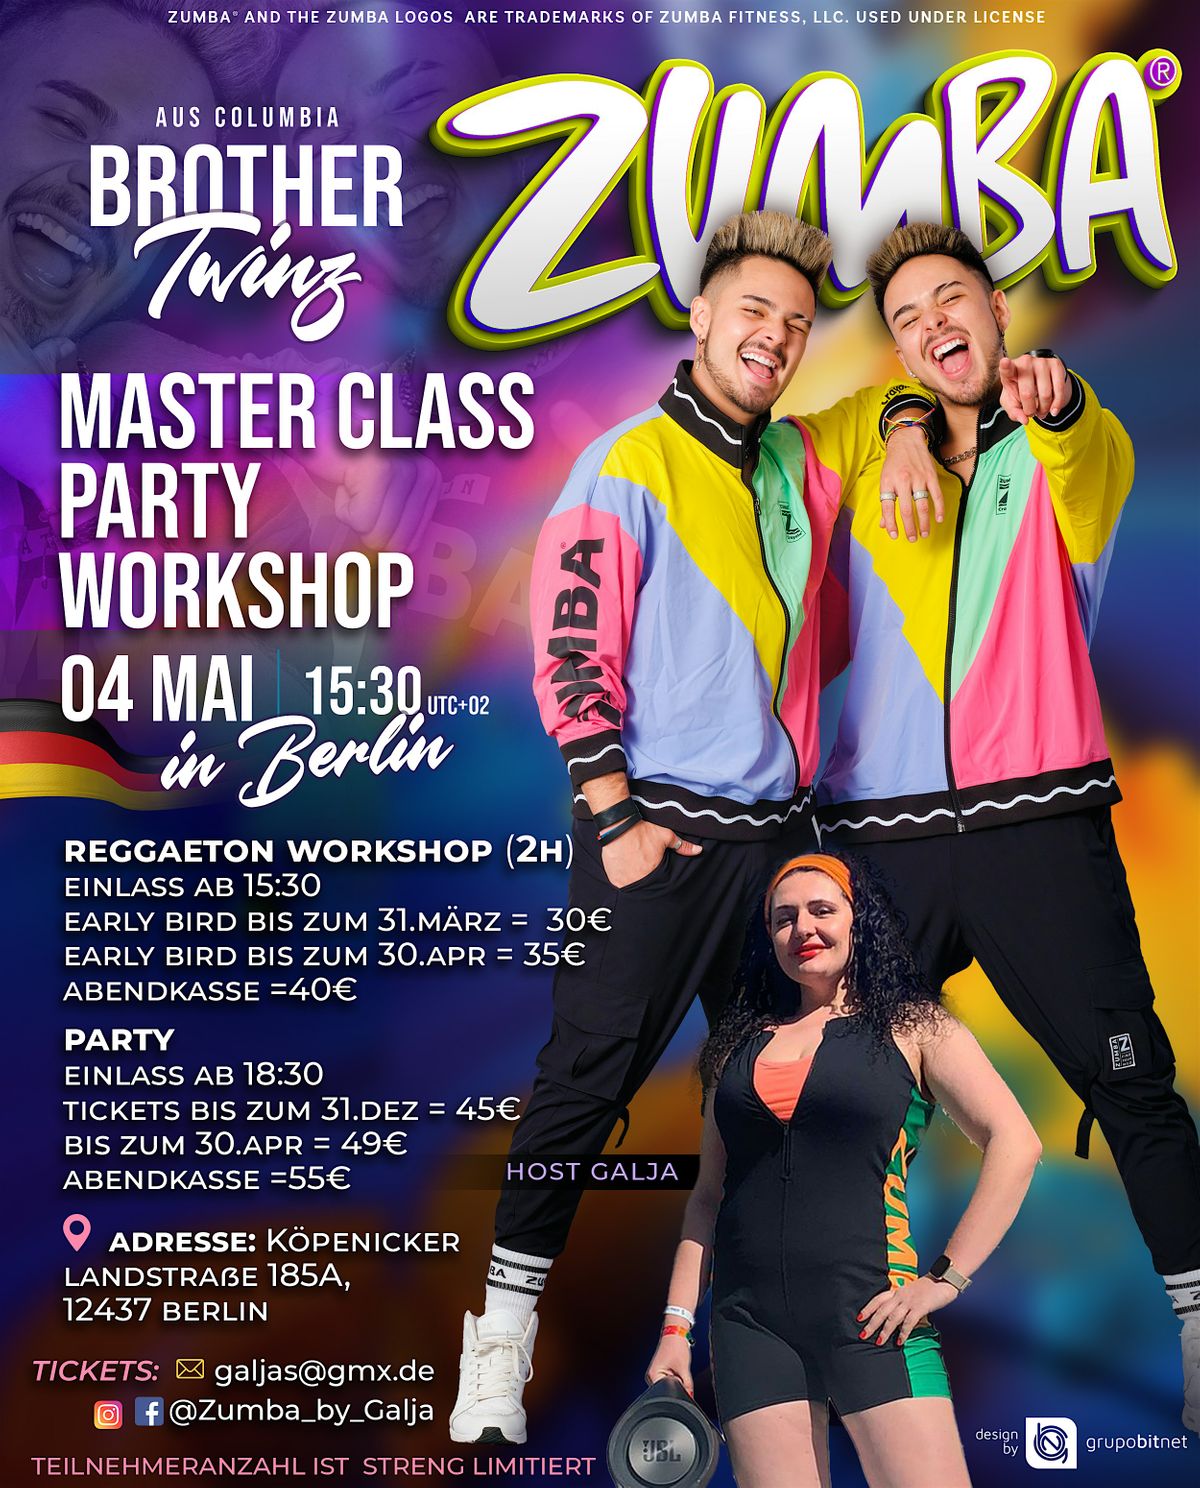 Zumba Master Class with TWINZ BROTHERS in Berlin